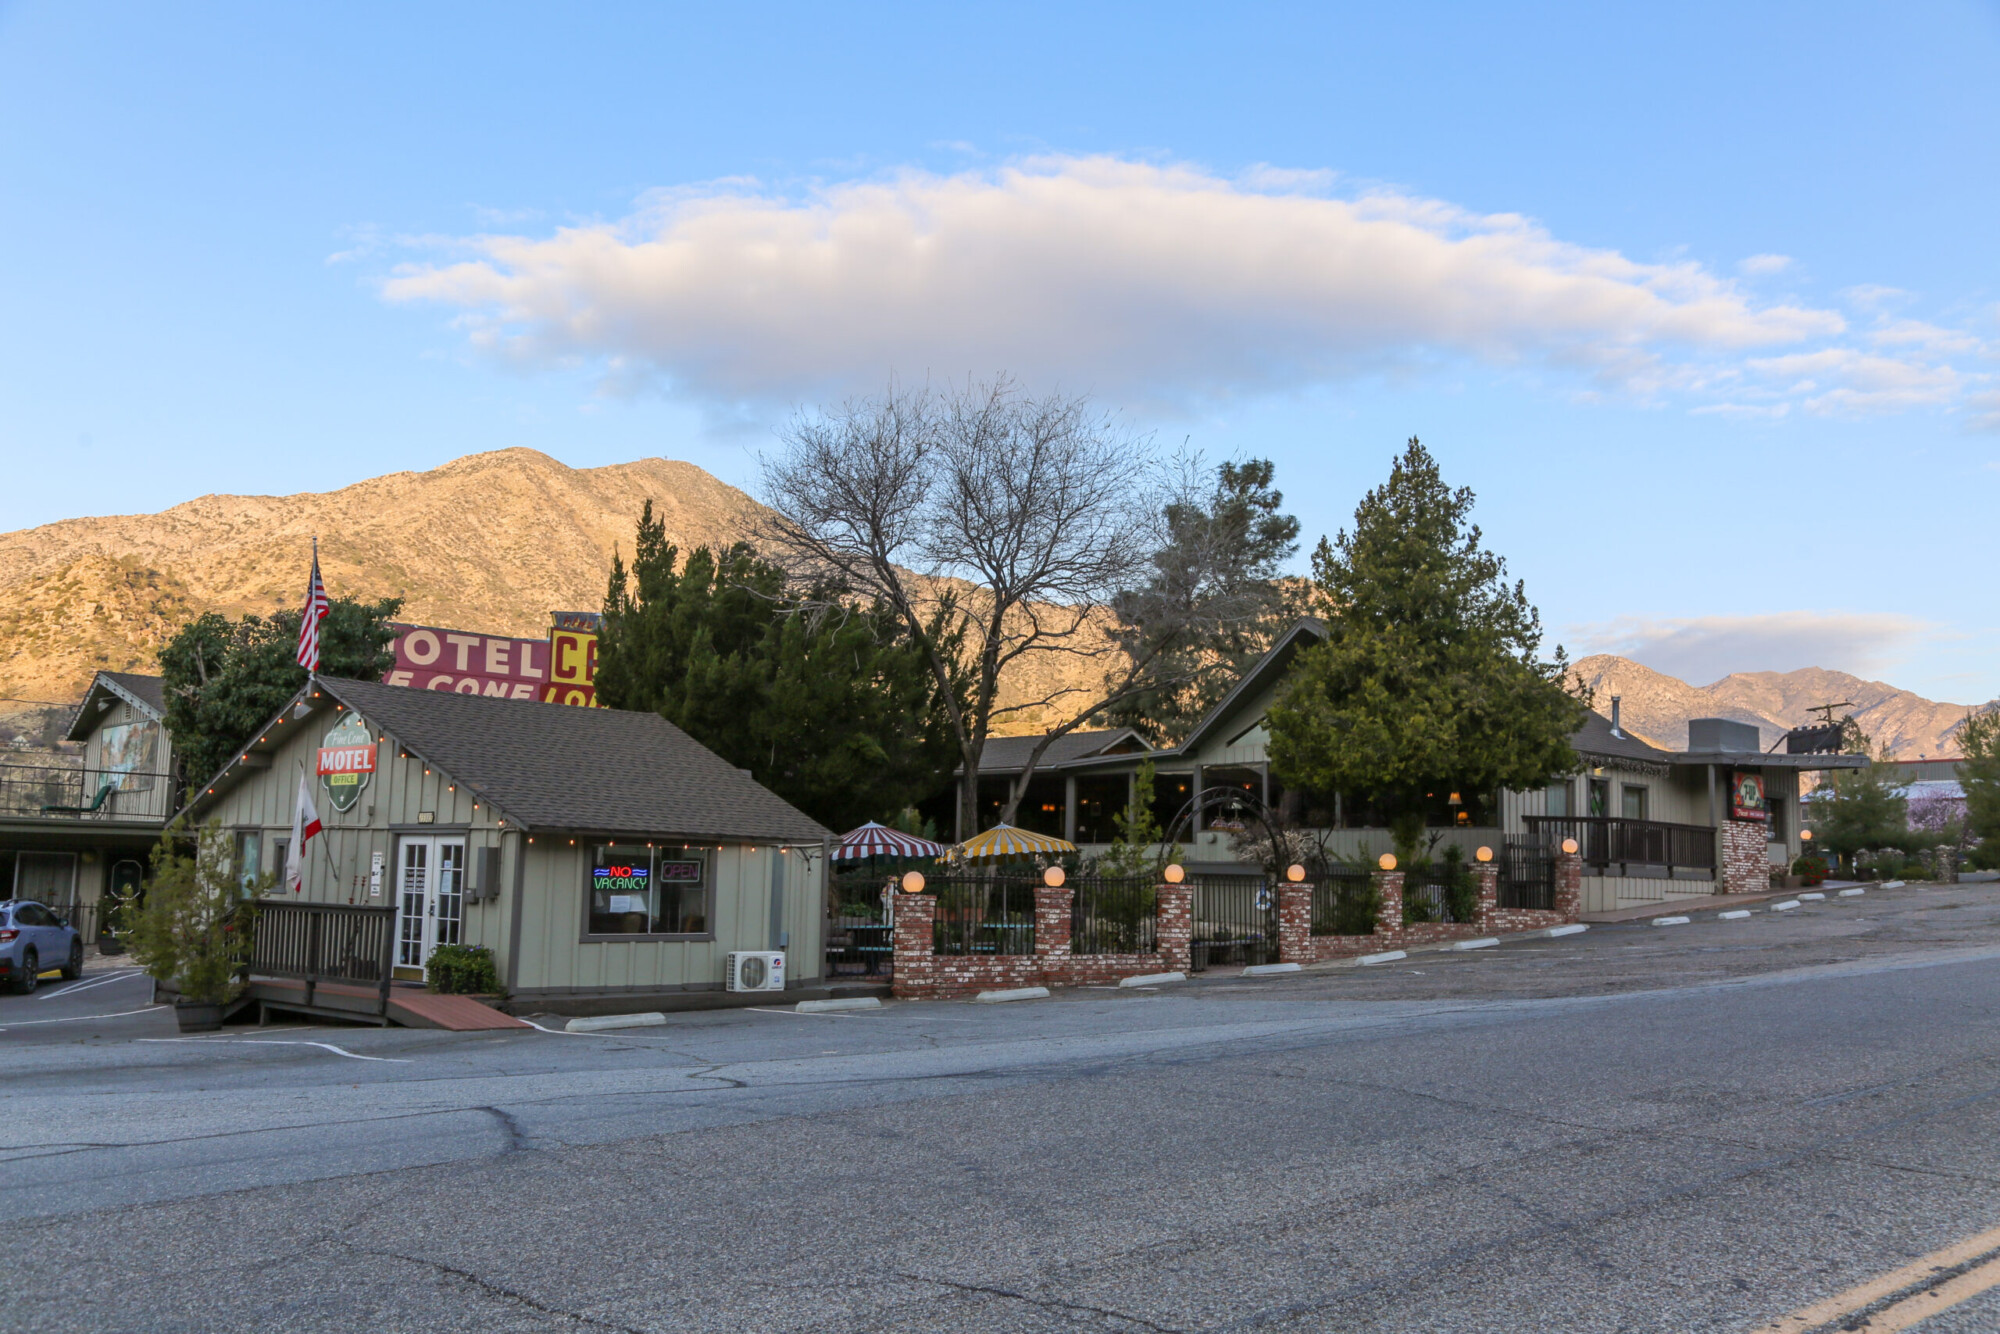 Exterior view of a small light green with brown trim motel called Piazza's Pine Cone Inn in Kernville, California.